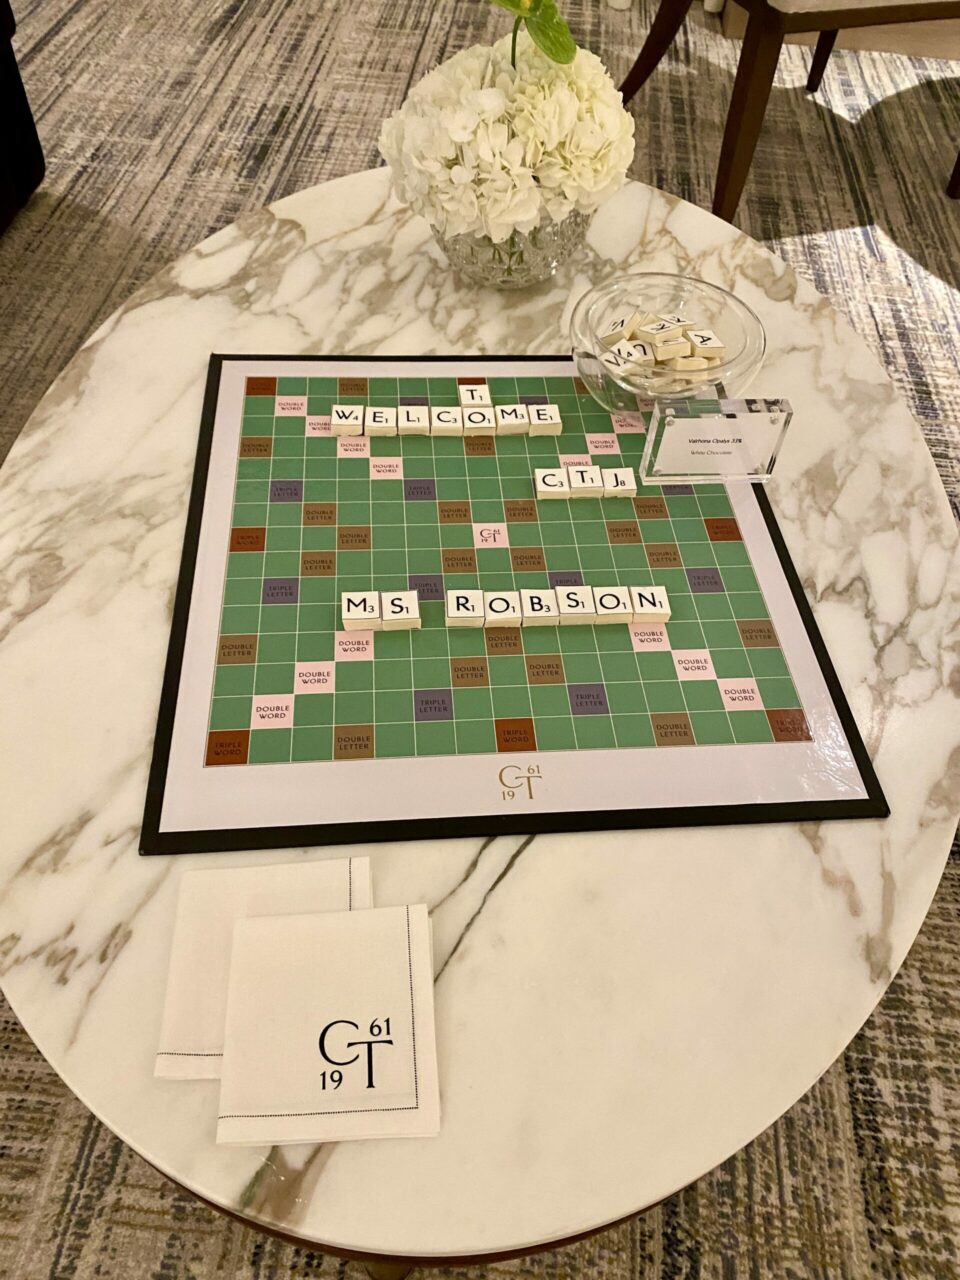 The Carlton Tower Jumeirah hotel Scrabble welcome letter